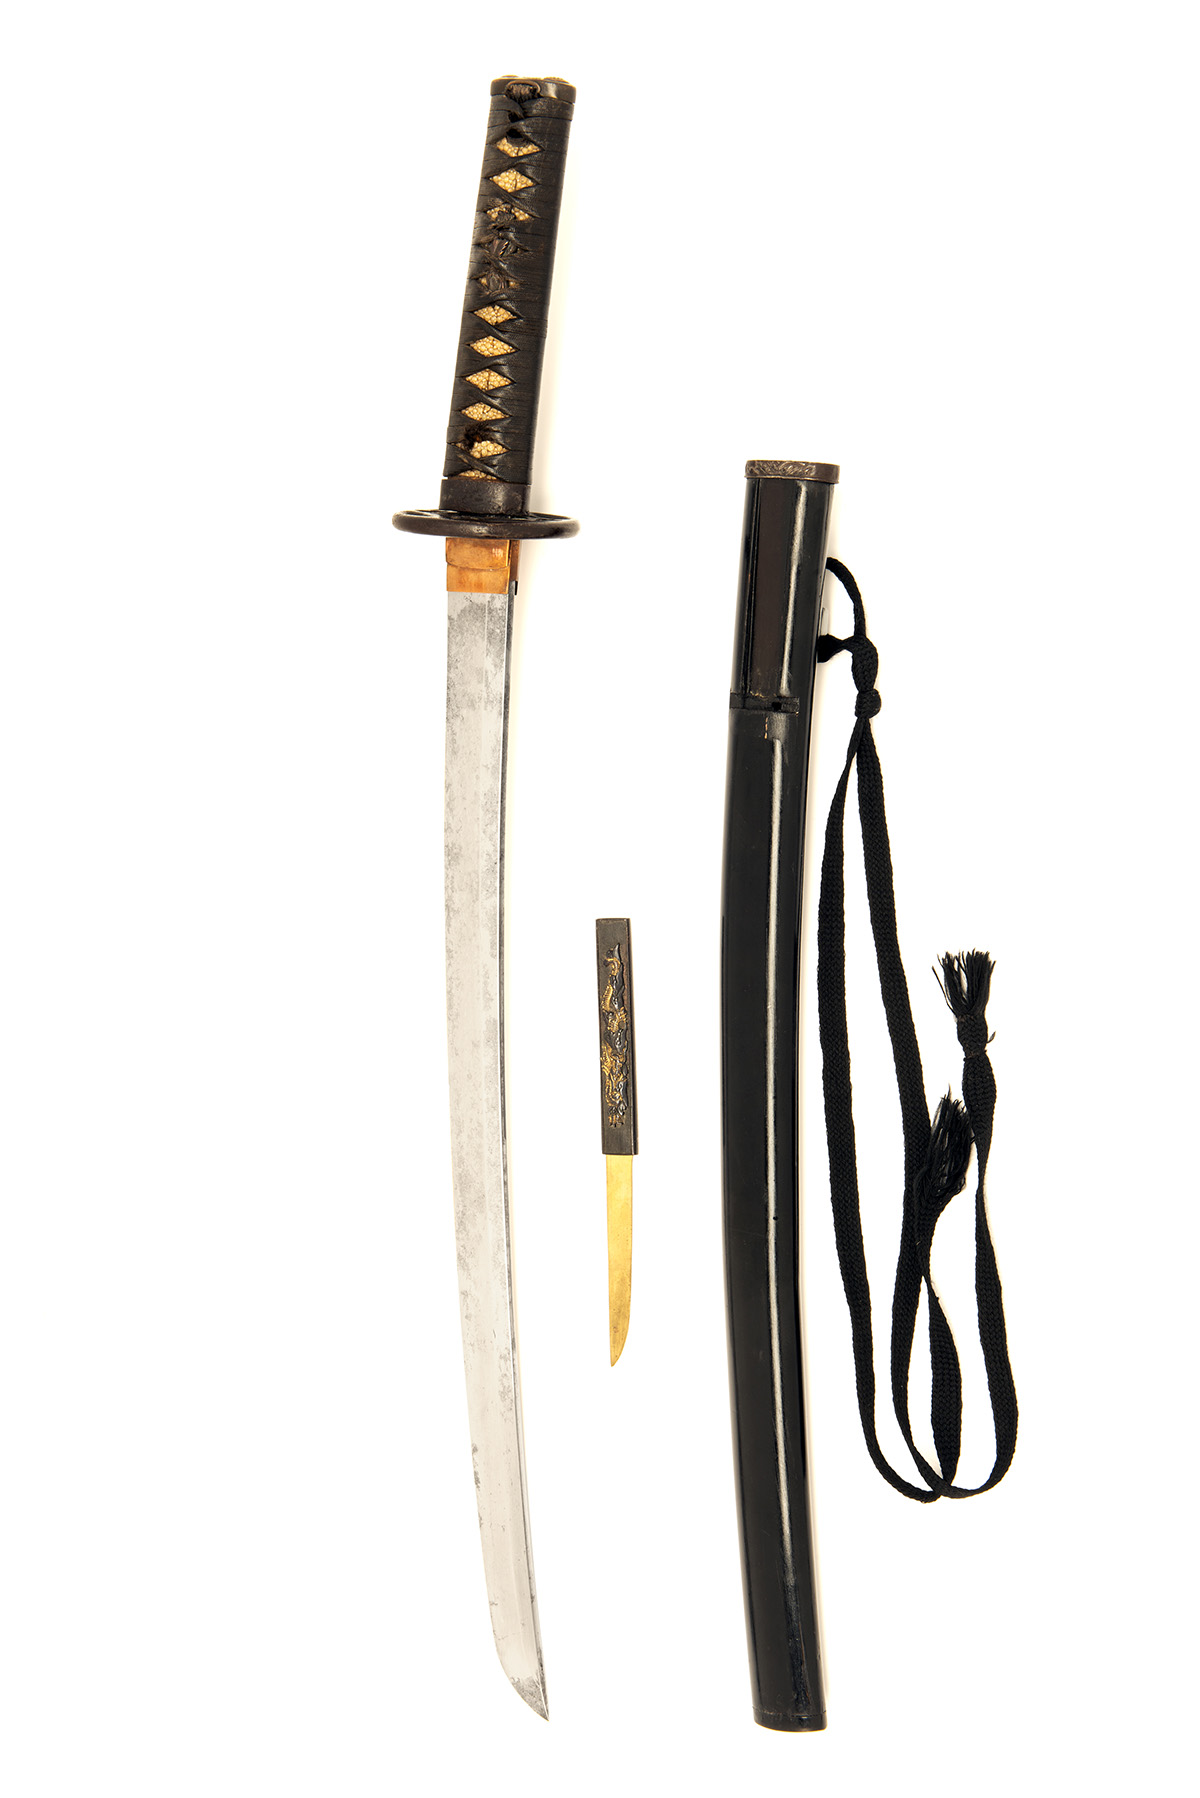 A JAPANESE WAKIZASHI, probably early 18th century, with 18 1/4in. curved and re-polished blade (some